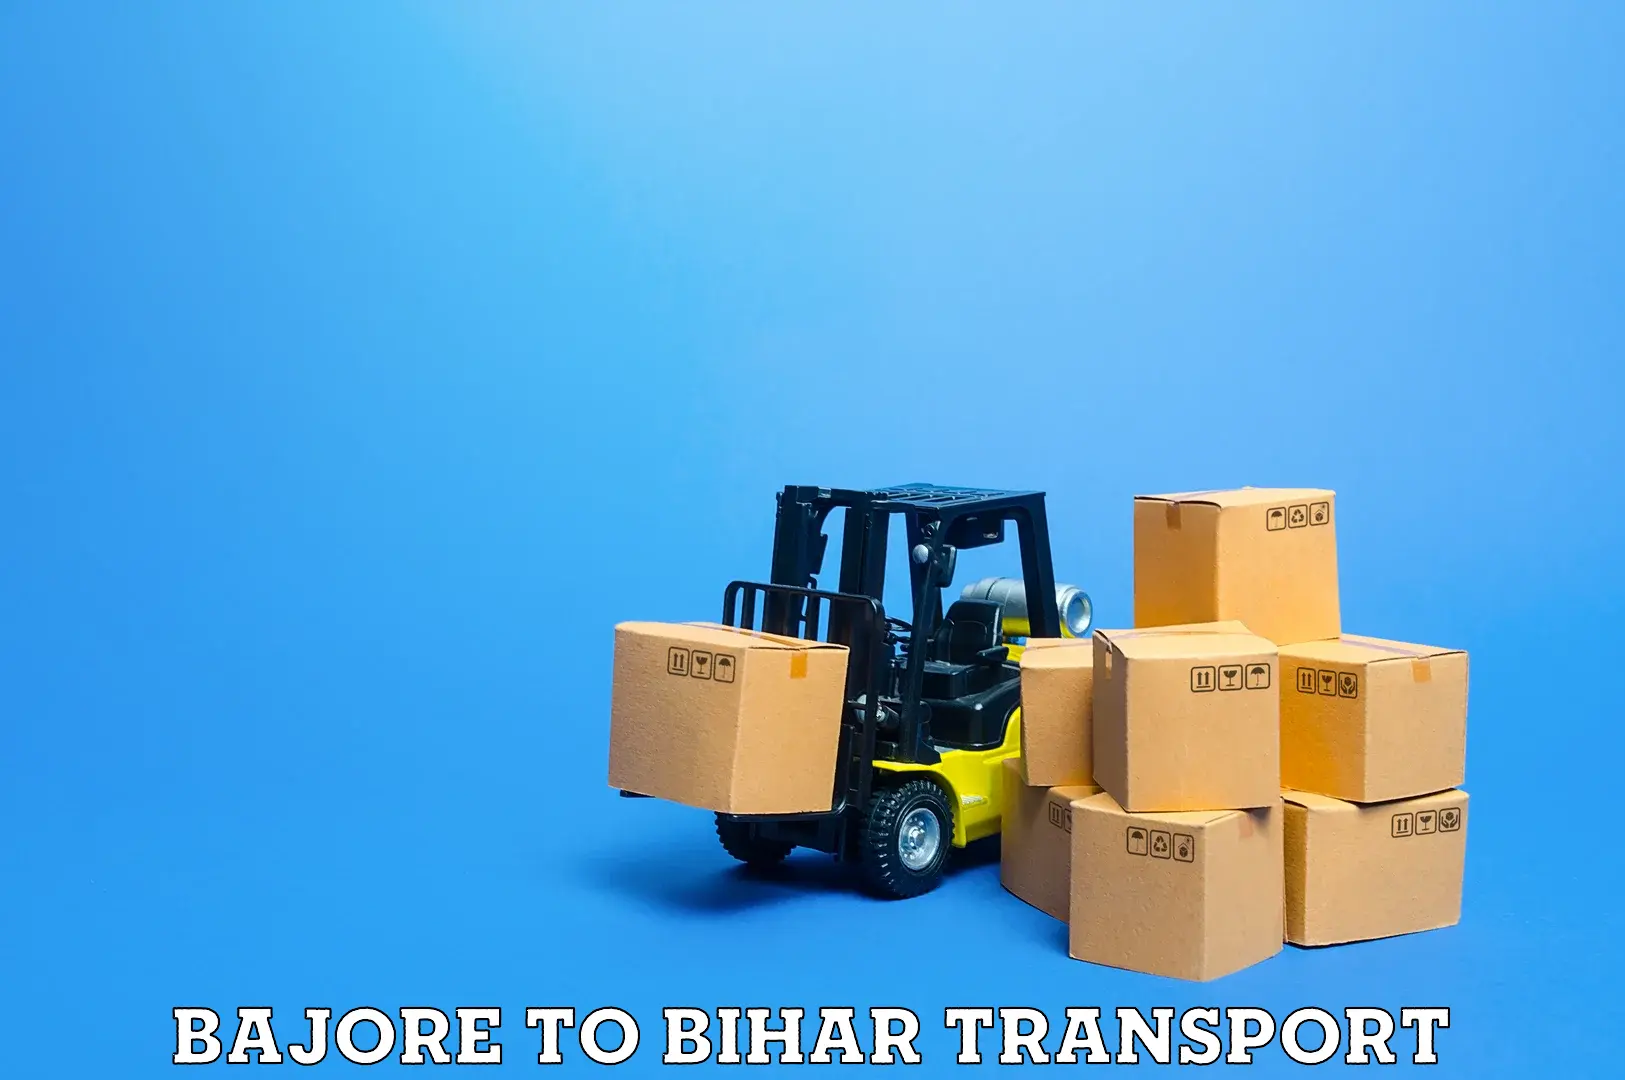 Truck transport companies in India Bajore to Bhorey